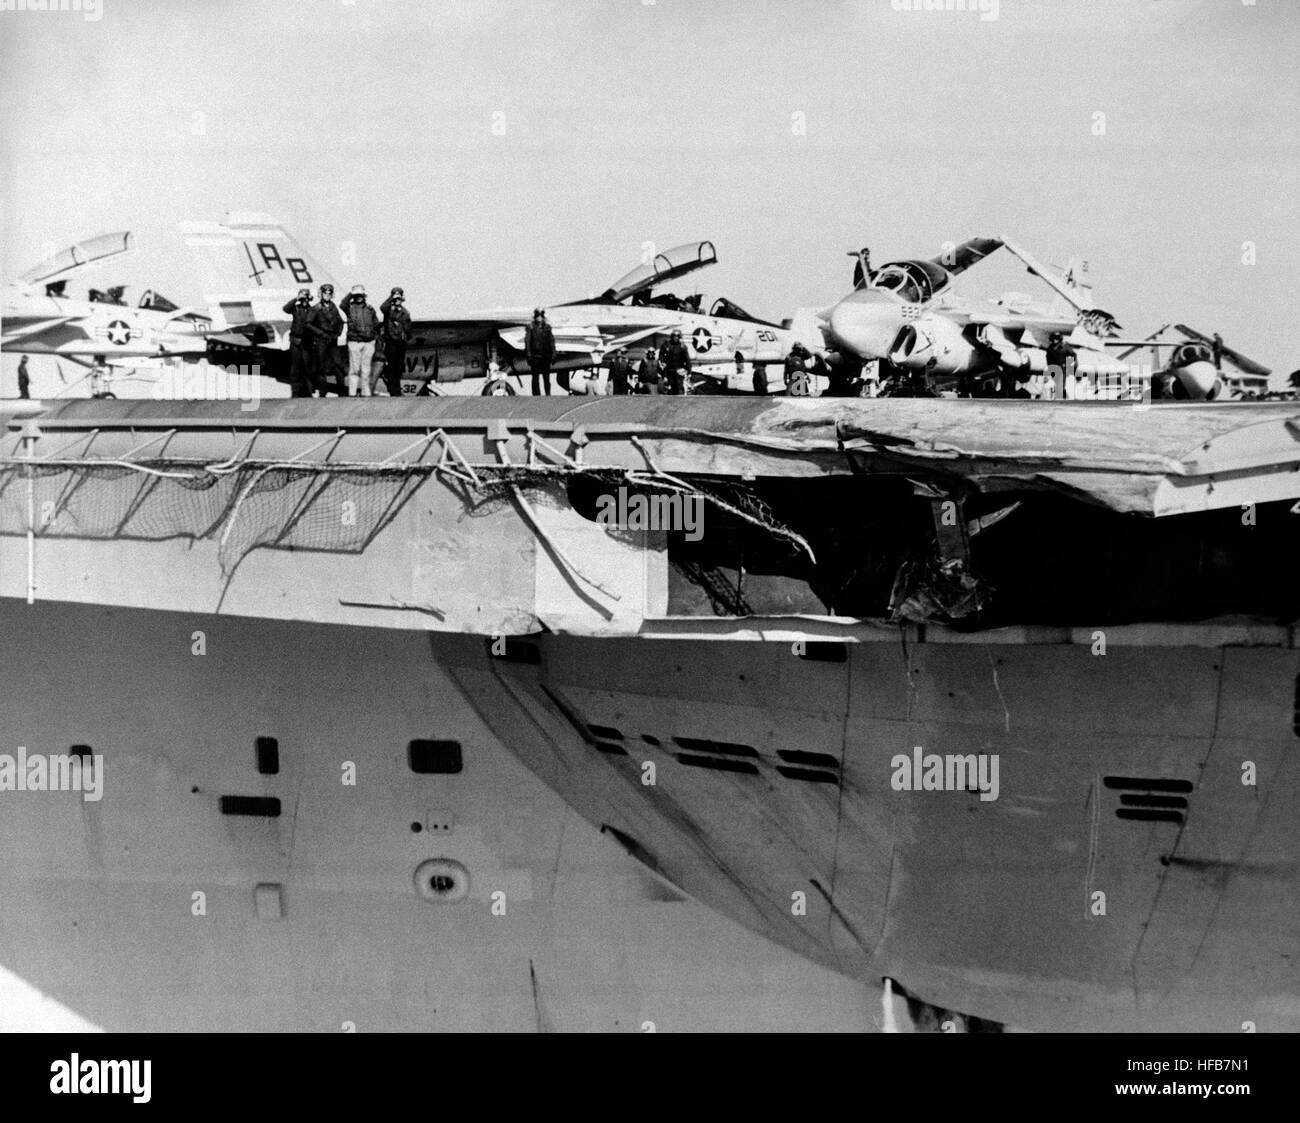 A view of damage sustained by the aircraft carrier USS JOHN F. KENNEDY (CV 67) when it collided with the guided missile cruiser USS BELKNAP (CG 26) during night operations on November 22, 1975. DN-SN-87-07322 USS John F. Kennedy damaged front end of angled deck Stock Photo